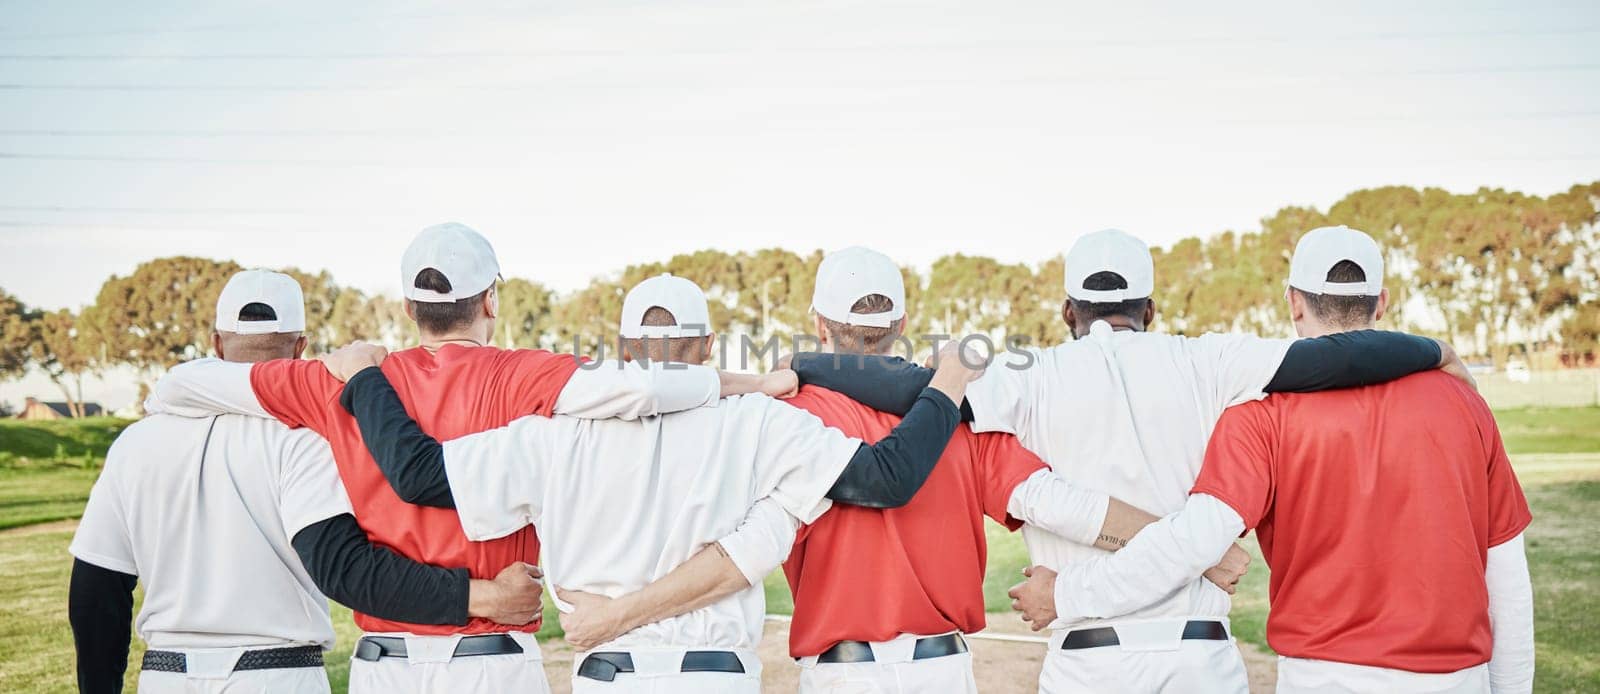 Back, teamwork and solidarity with a baseball group of people standing outdoor on a field for a game. Teamwork, support and training with friends or teammates in unity on a pitch for sports in summer.